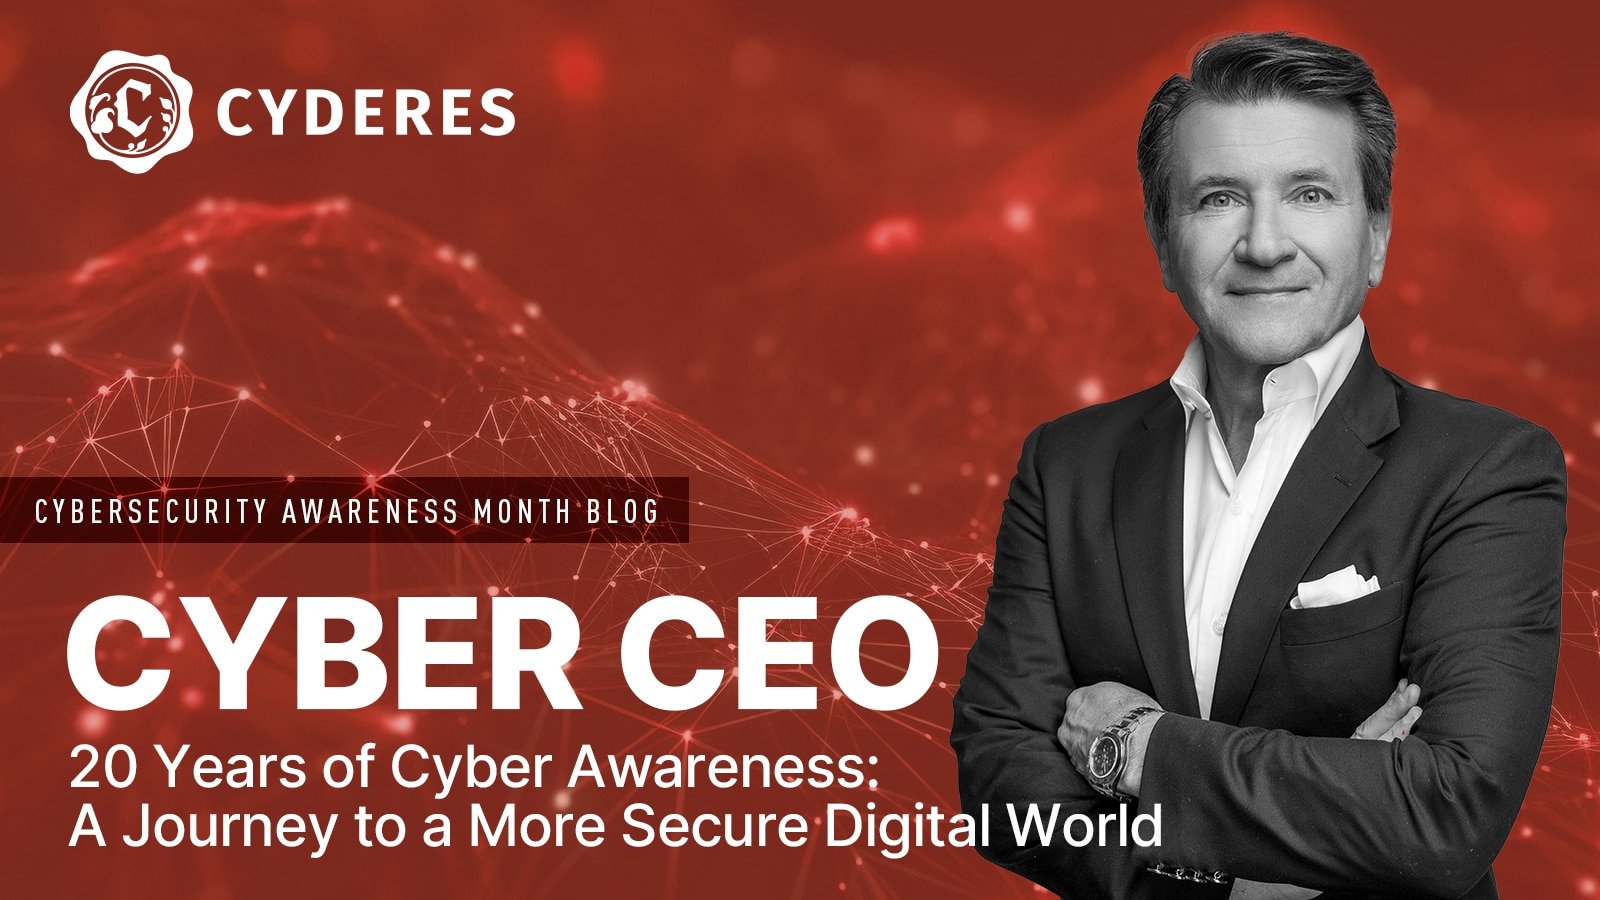 20 Years of Cyber Awareness: A Journey to a More Secure Digital World